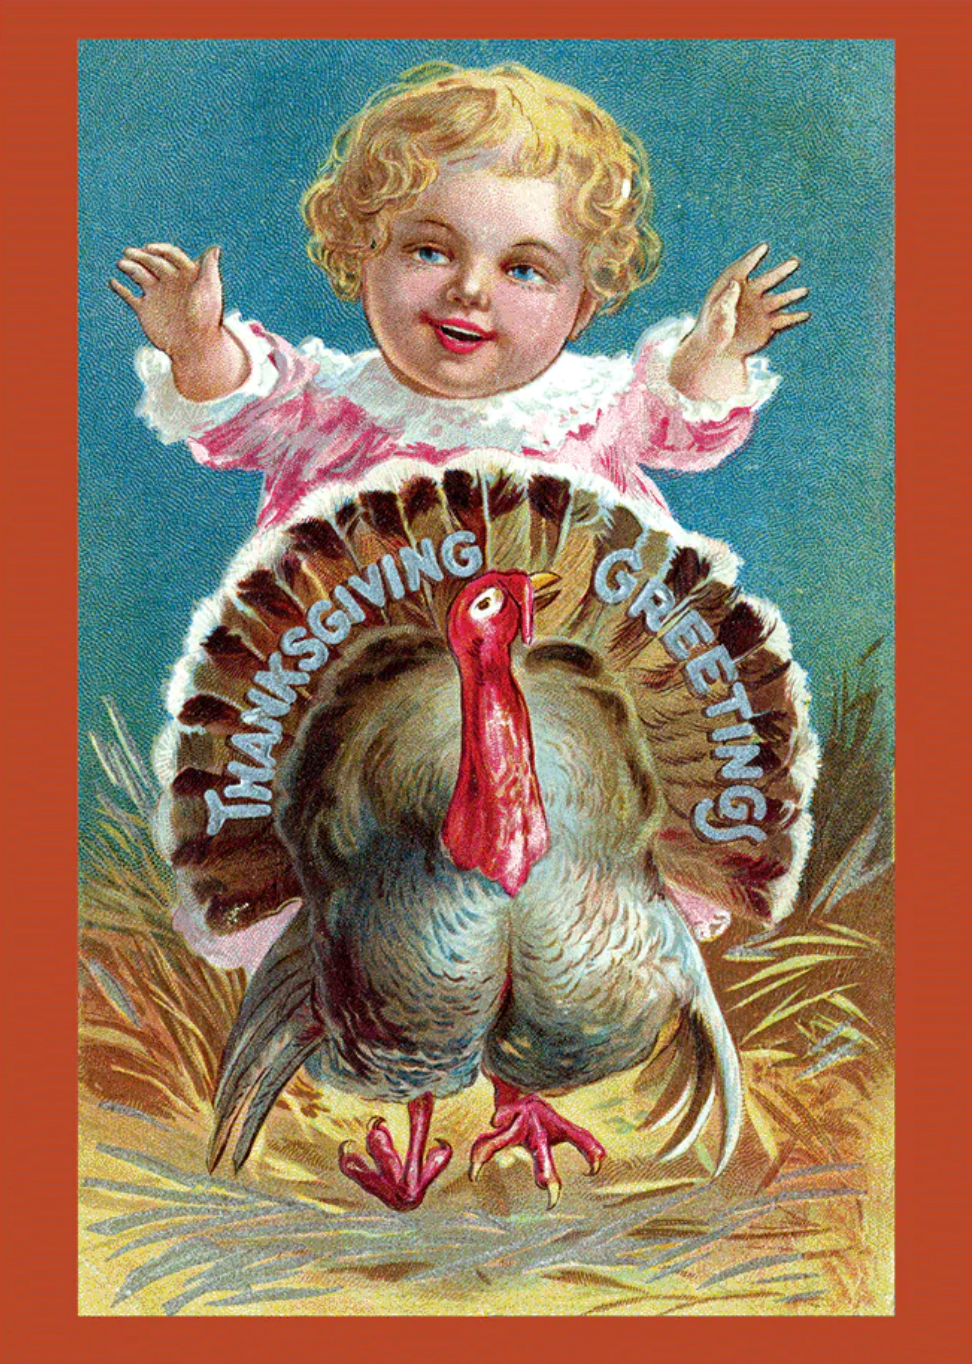 Baby and a Big Turkey - Thanksgiving Greeting Card